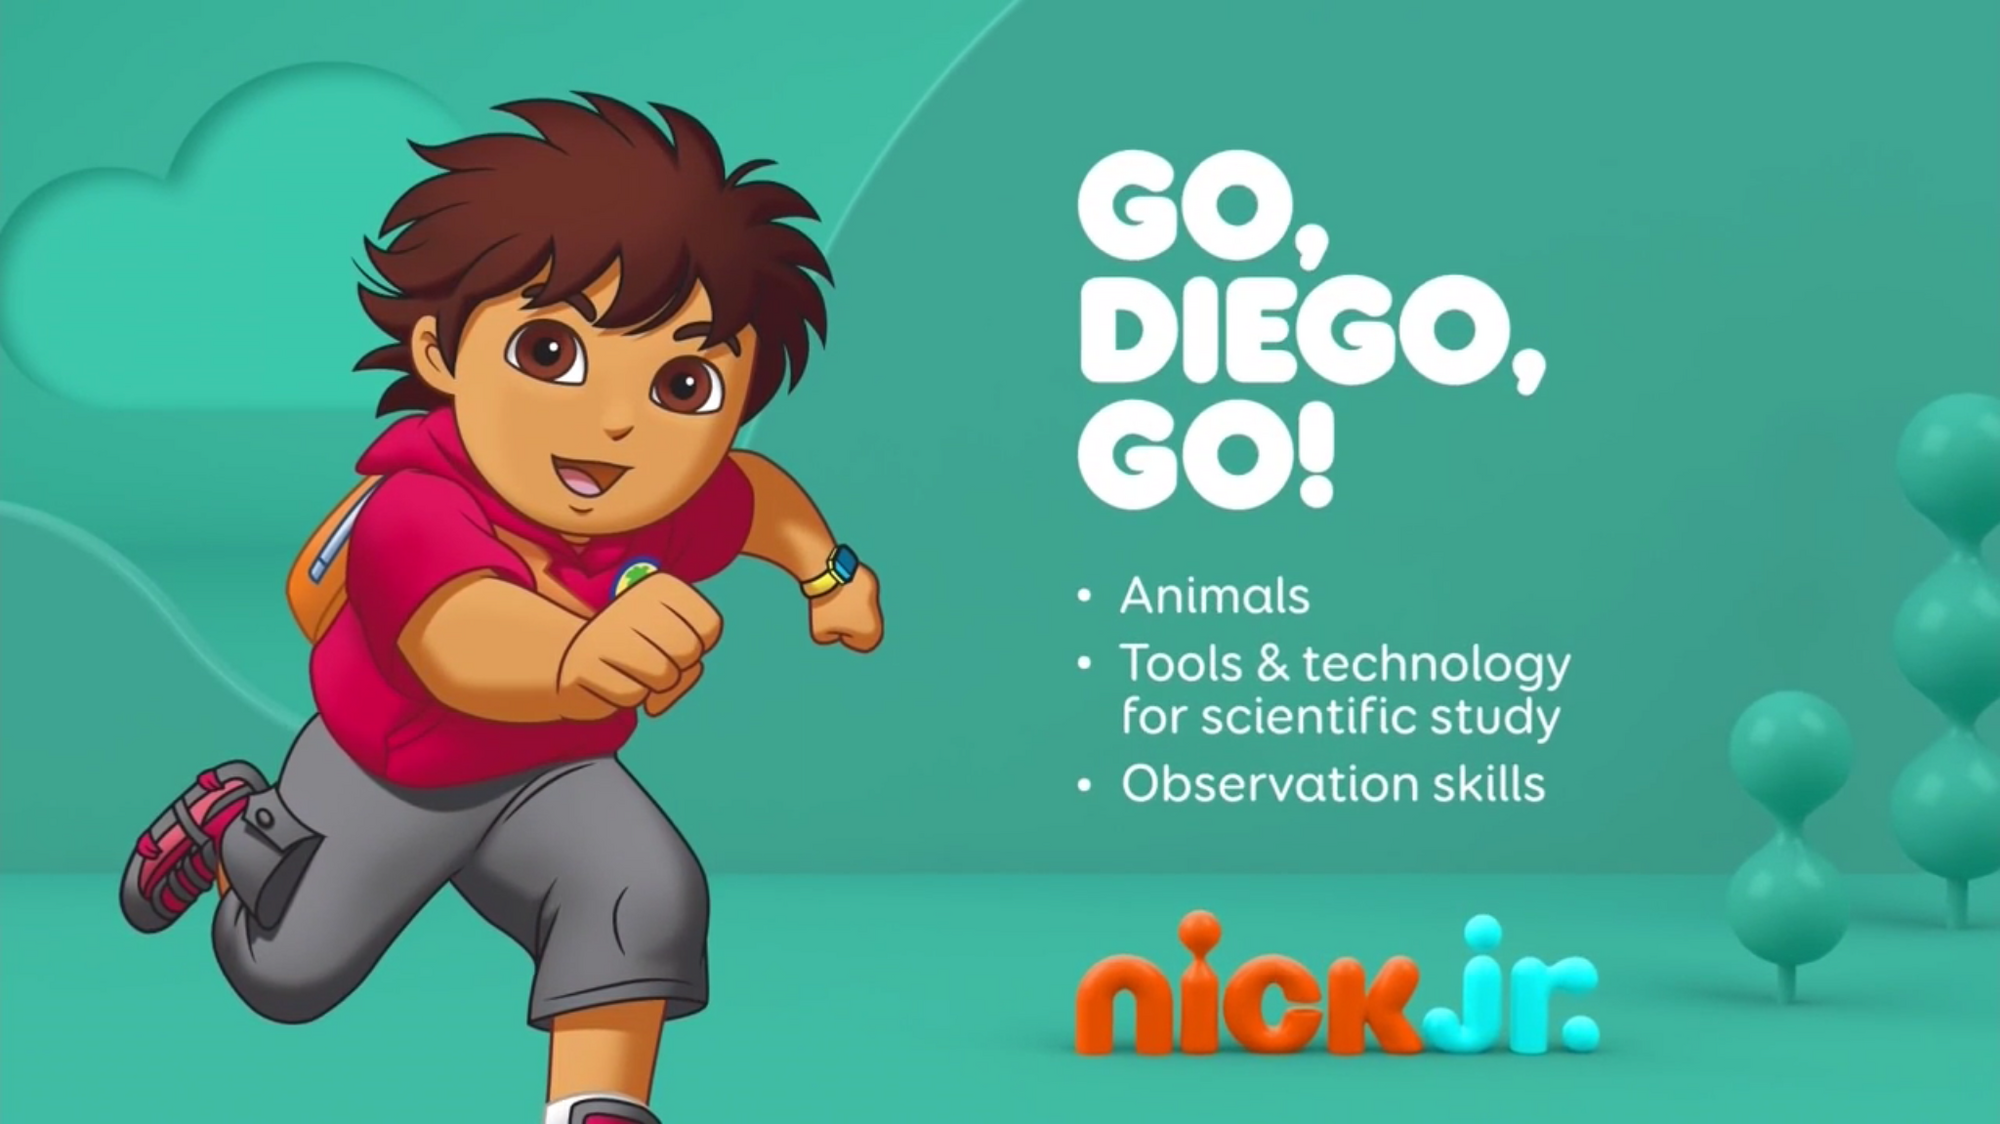 image-diego-2018-curriculum-board-png-nick-jr-wiki-fandom-powered-by-wikia